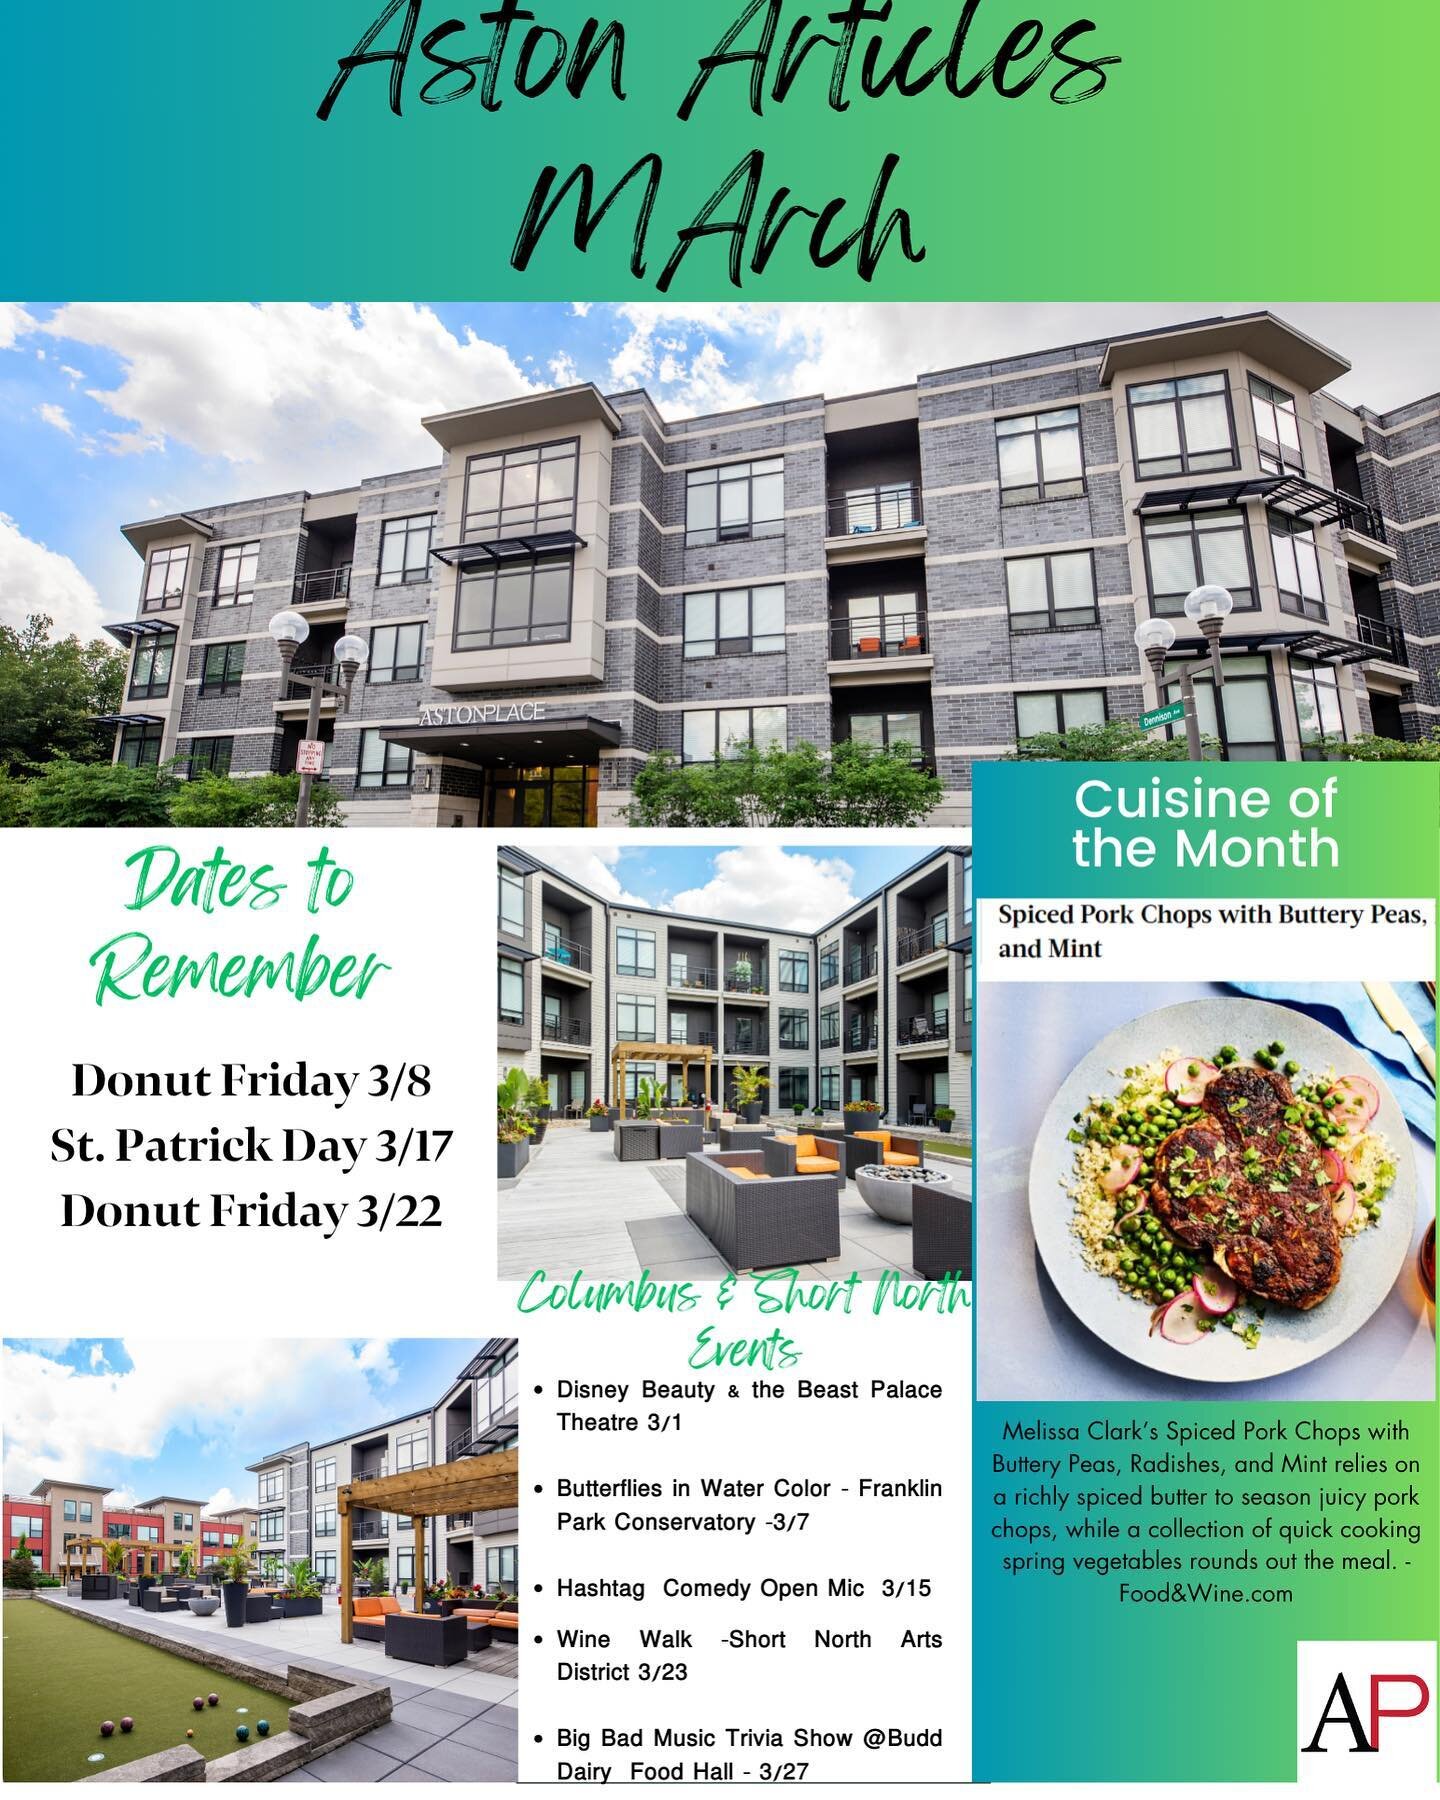 March has arrived!☘️☘️ Check out our Aston Place Articles Newsletter for some fun and exciting events taking place this month. Check out @experiencecolumbus &amp; @shortnorthartsdistrict  for more events this month!